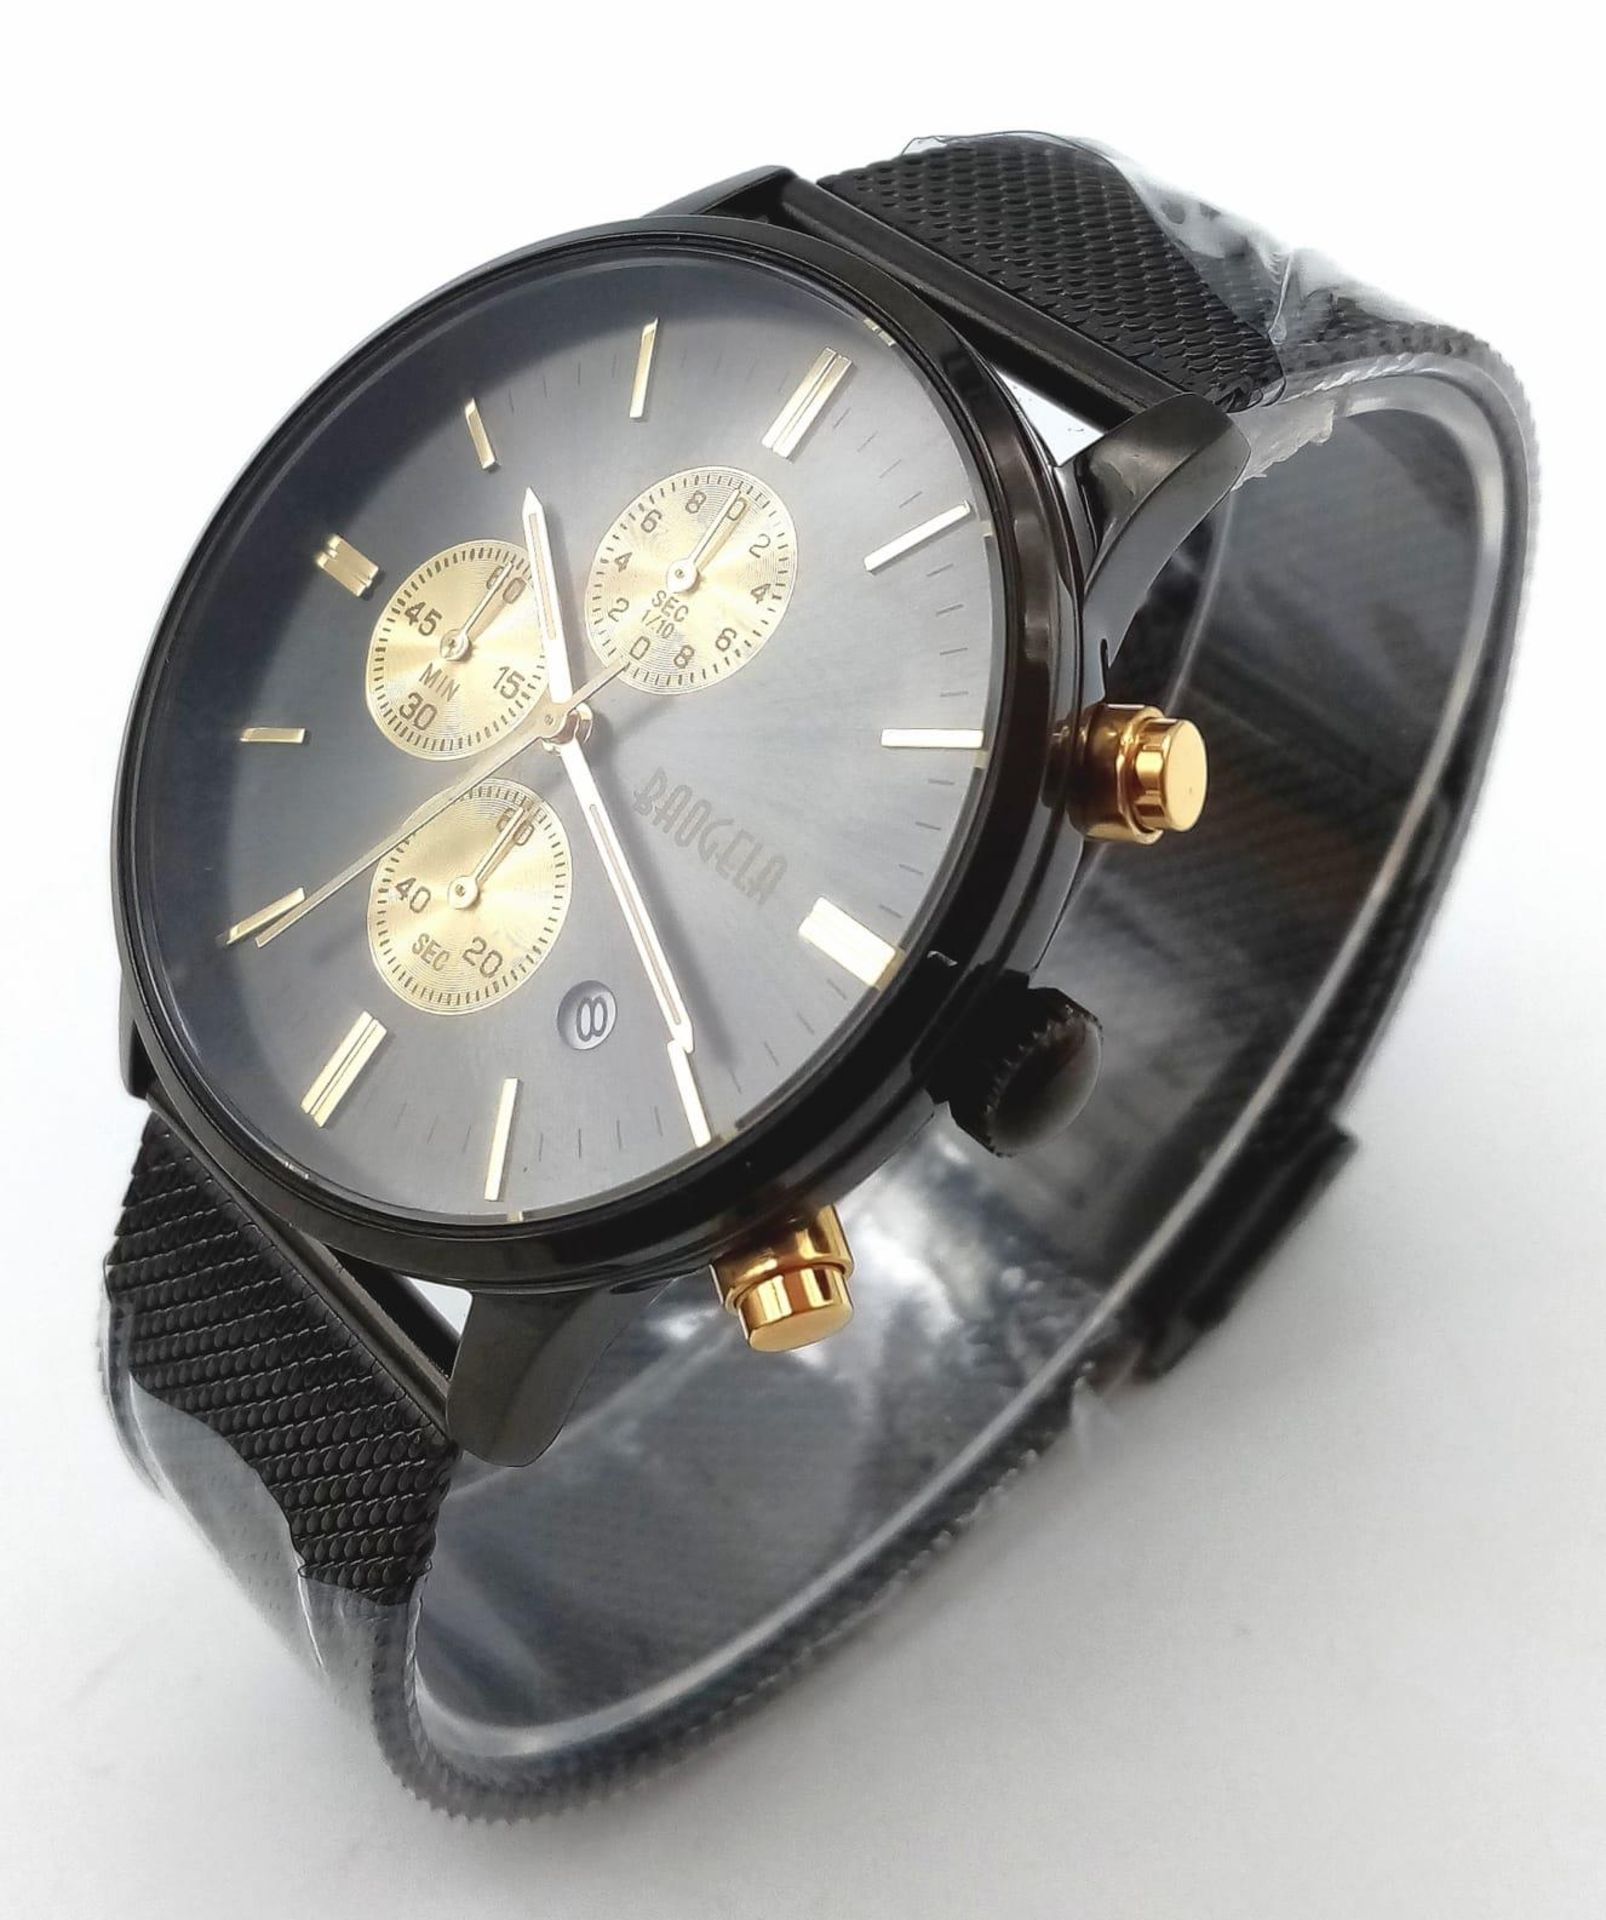 Unworn, Men’s Chronograph Sports Date Watch by Baogela. 45mm including Crown. Comes with Box and - Image 3 of 17